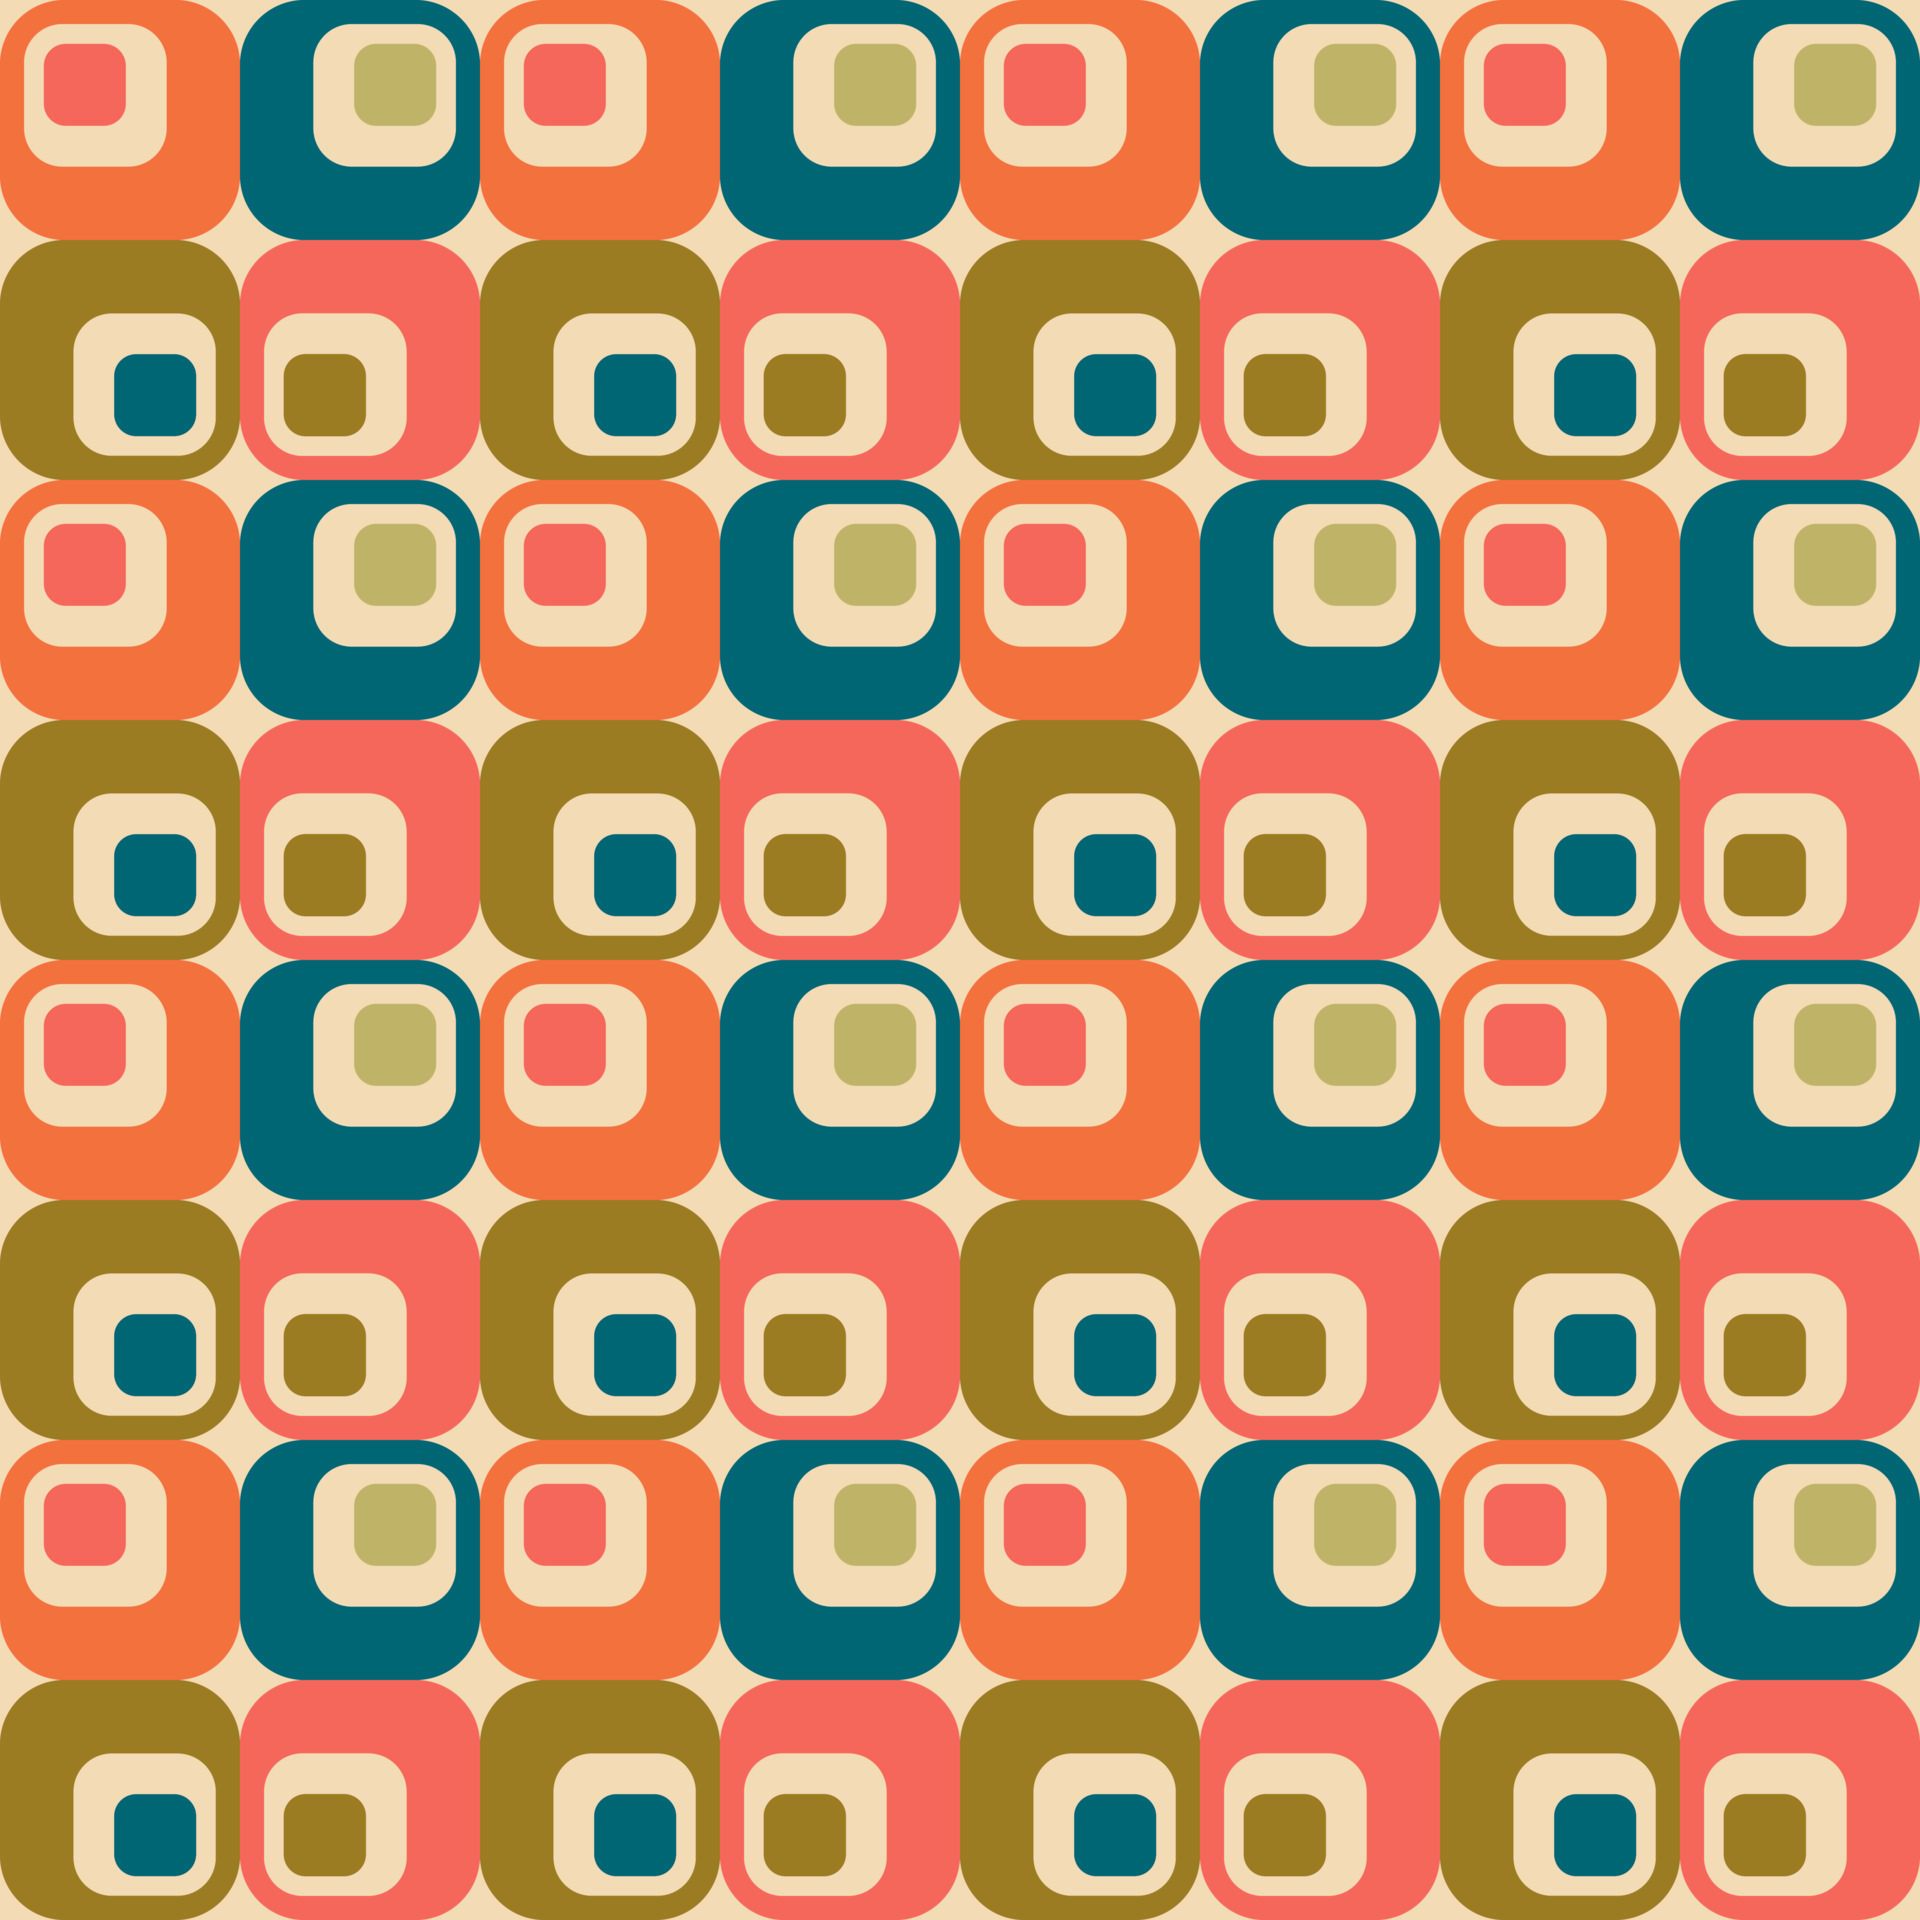 Aesthetic mid century printable seamless pattern with retro design. Decorative 50s, 60s, 70s style Vintage modern background in minimalist mid century style for fabric, wallpaper or wrapping